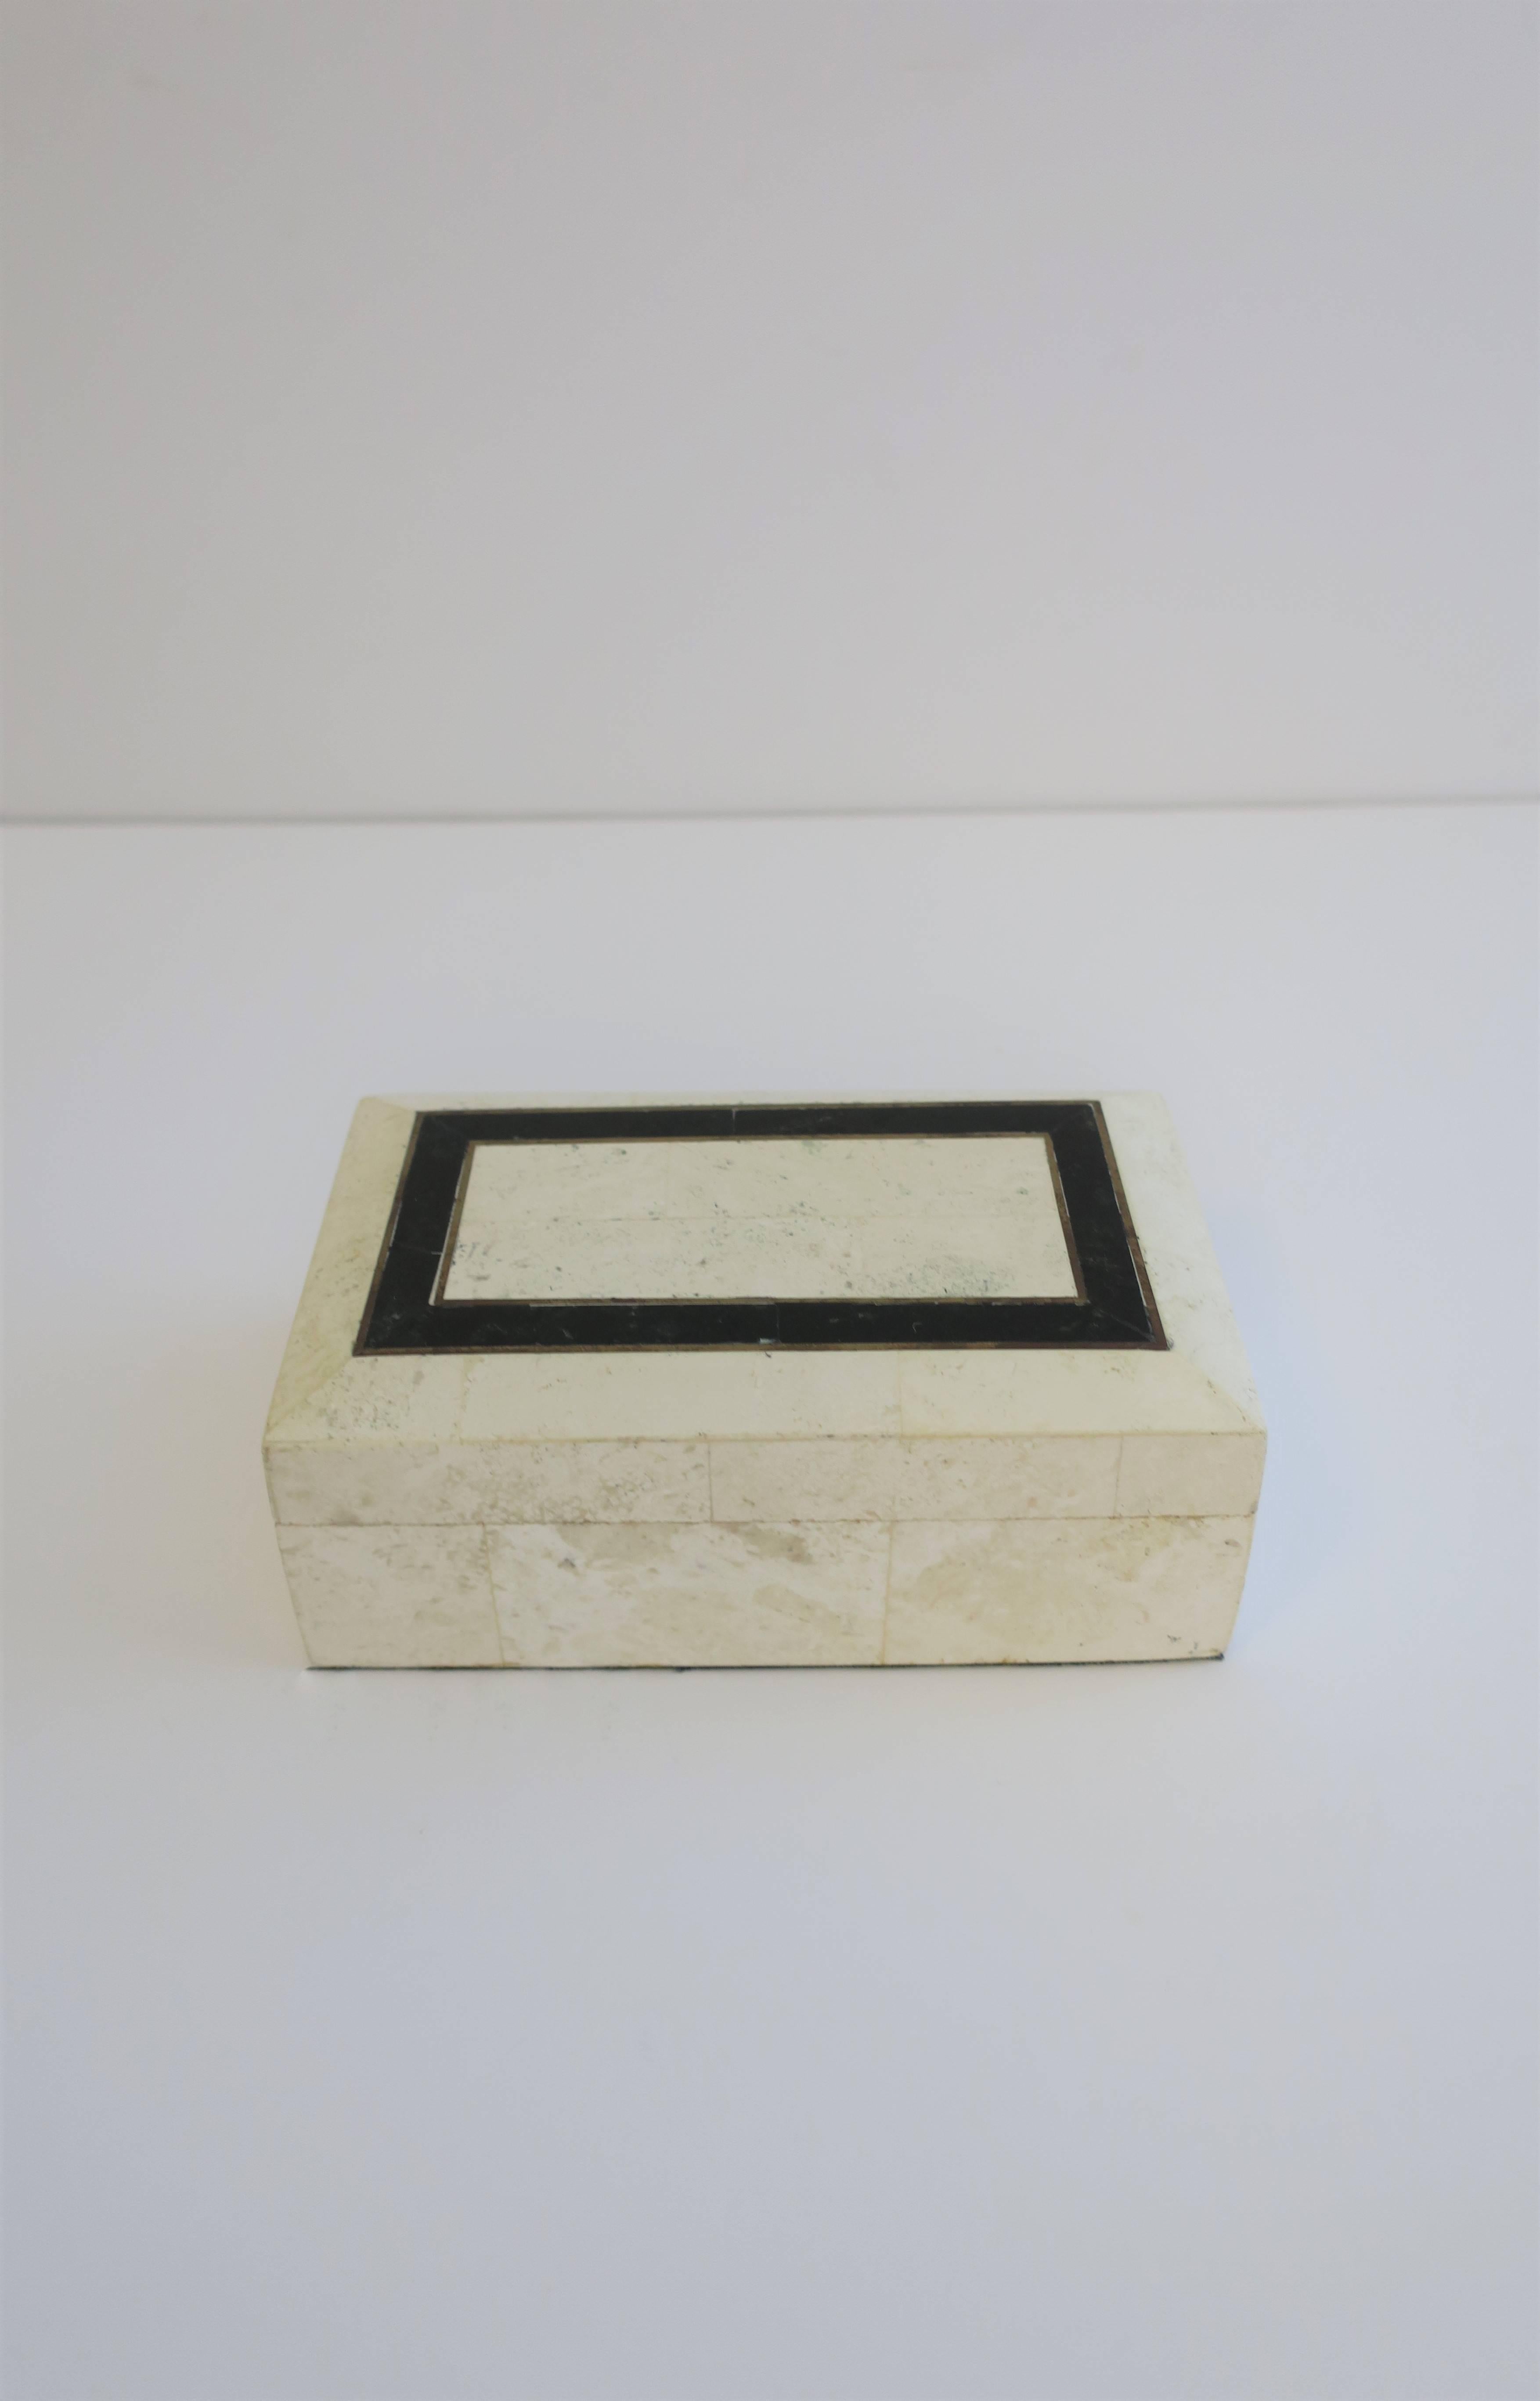 A beautiful Modern style black and white (white travertine marble is an off-white or cream hue) jewelry, vanity, or desk box with teak and velvet interior, circa late 20th Century, Post-Modern. Box lid has brass inlay detail between black stone and